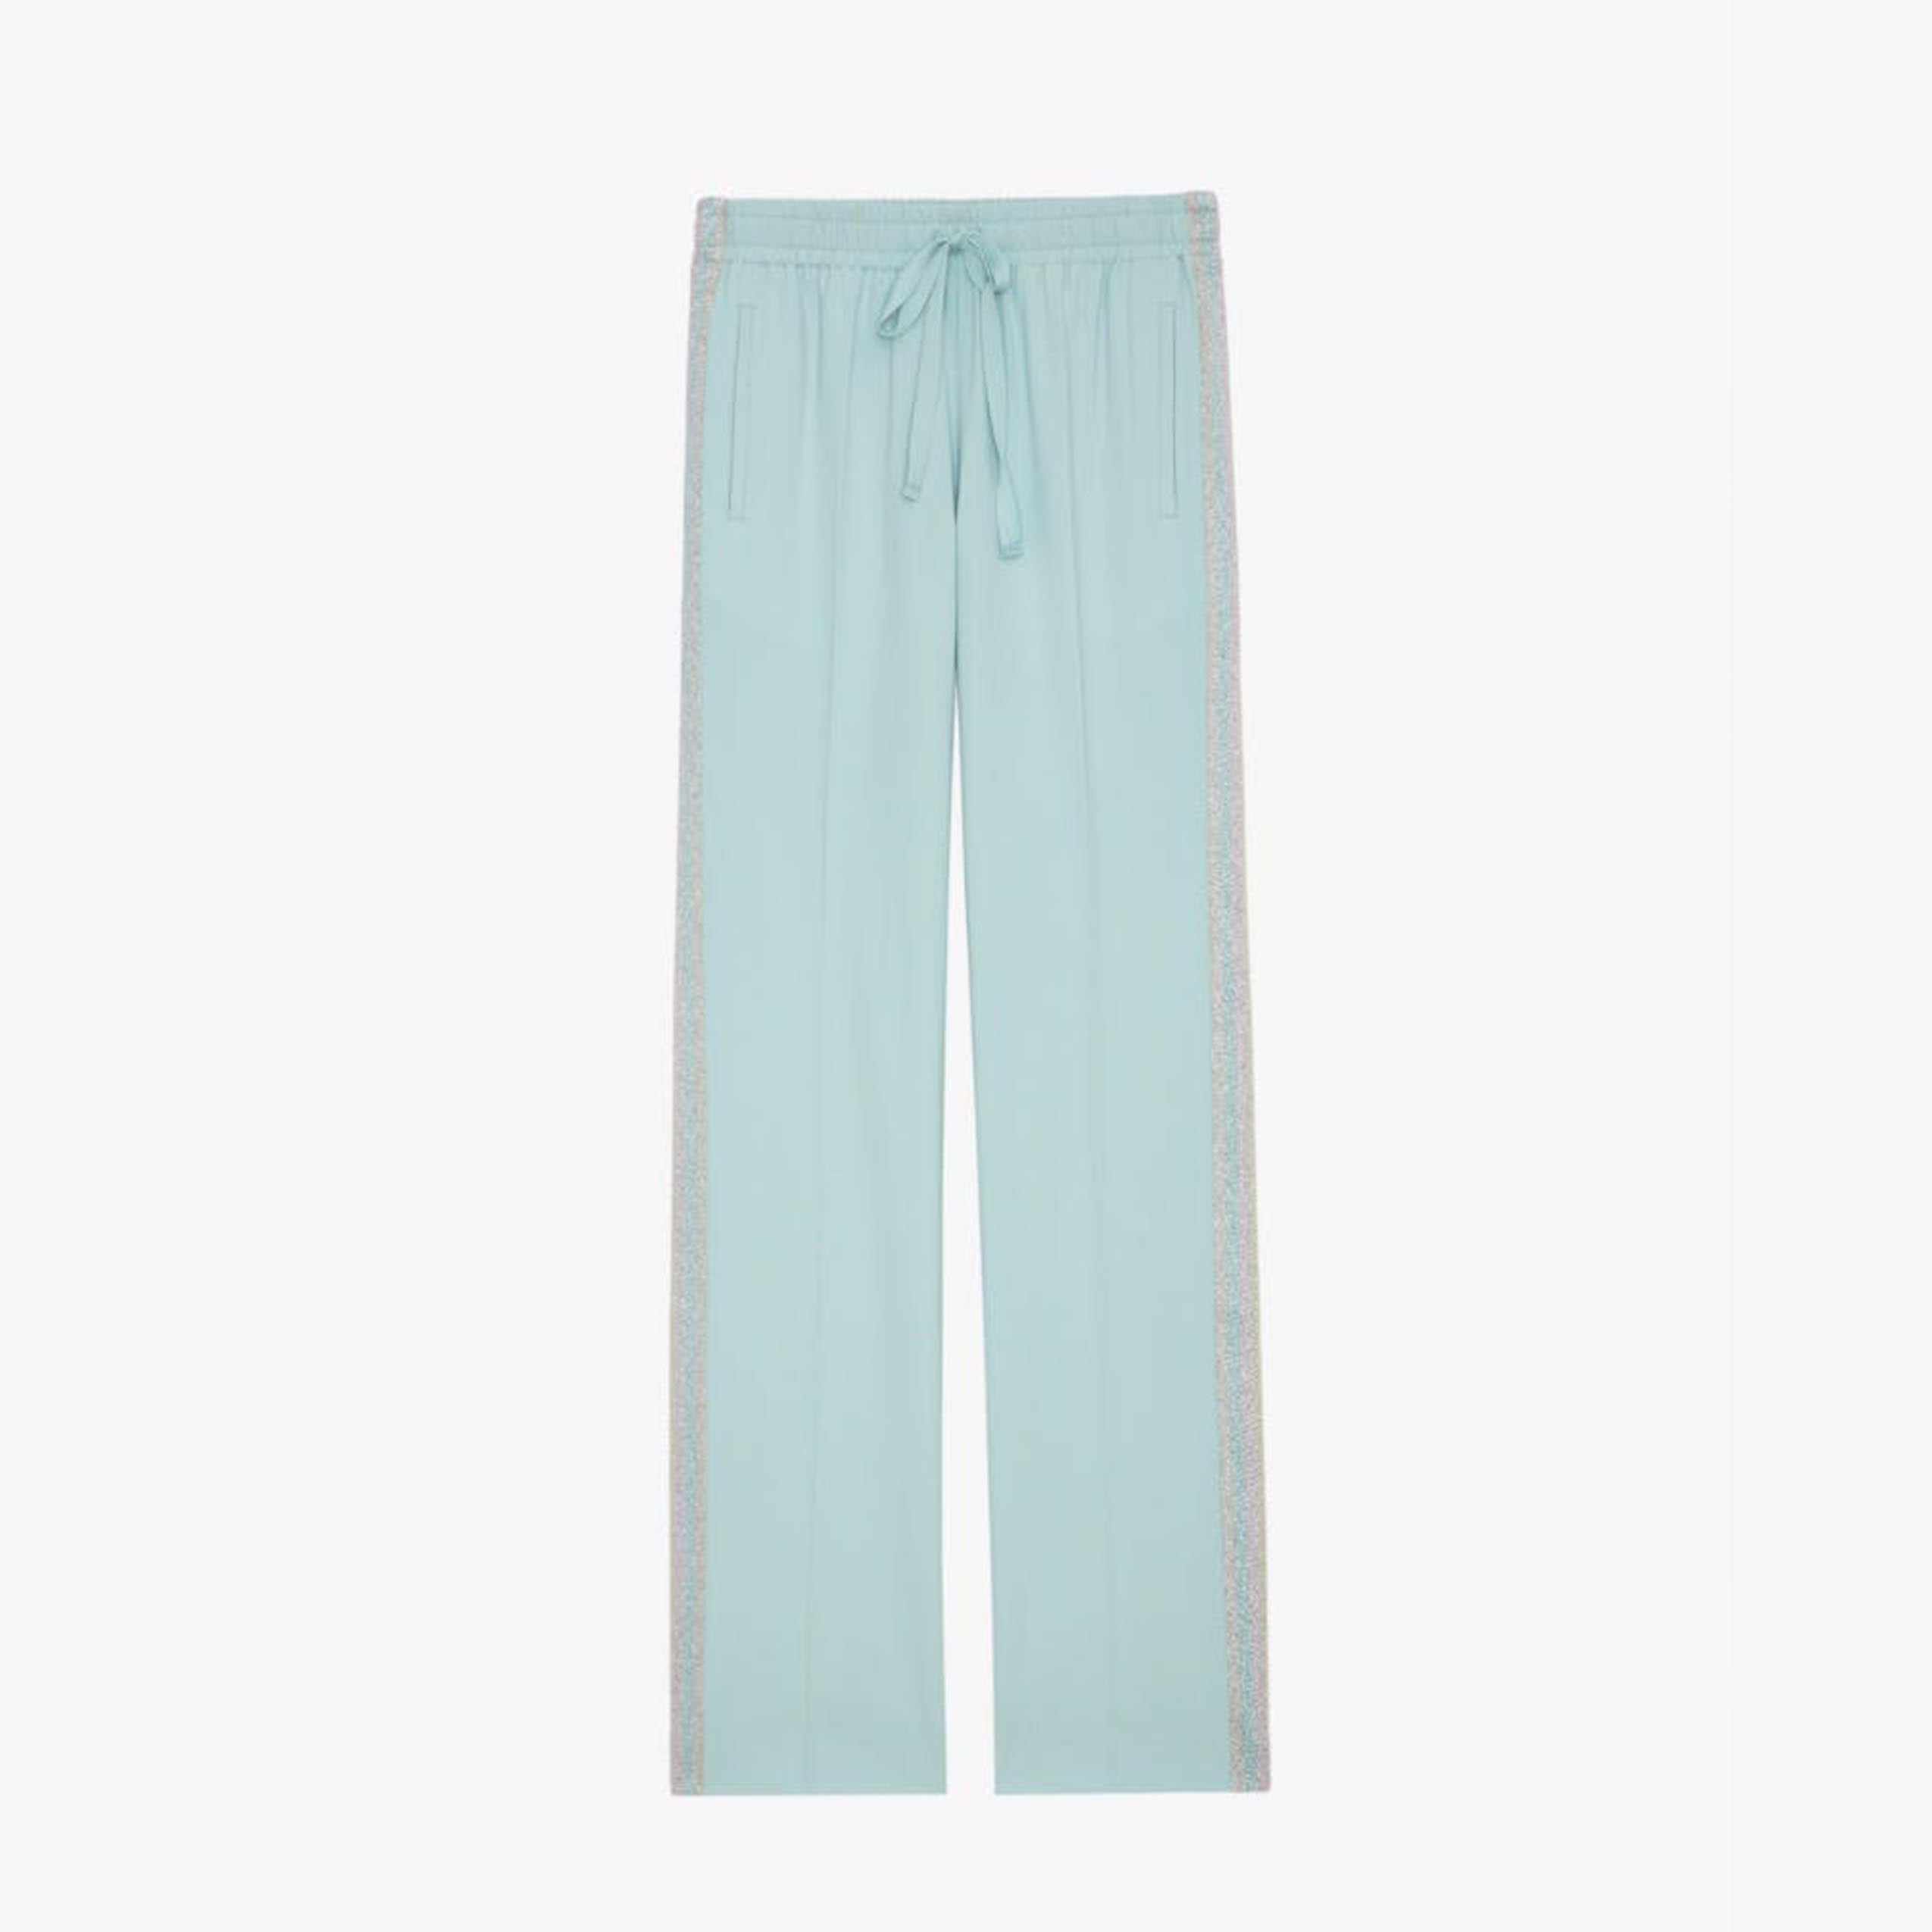 Pomy Crepe Pants in Celadon Blue from Zadig and Voltaire.